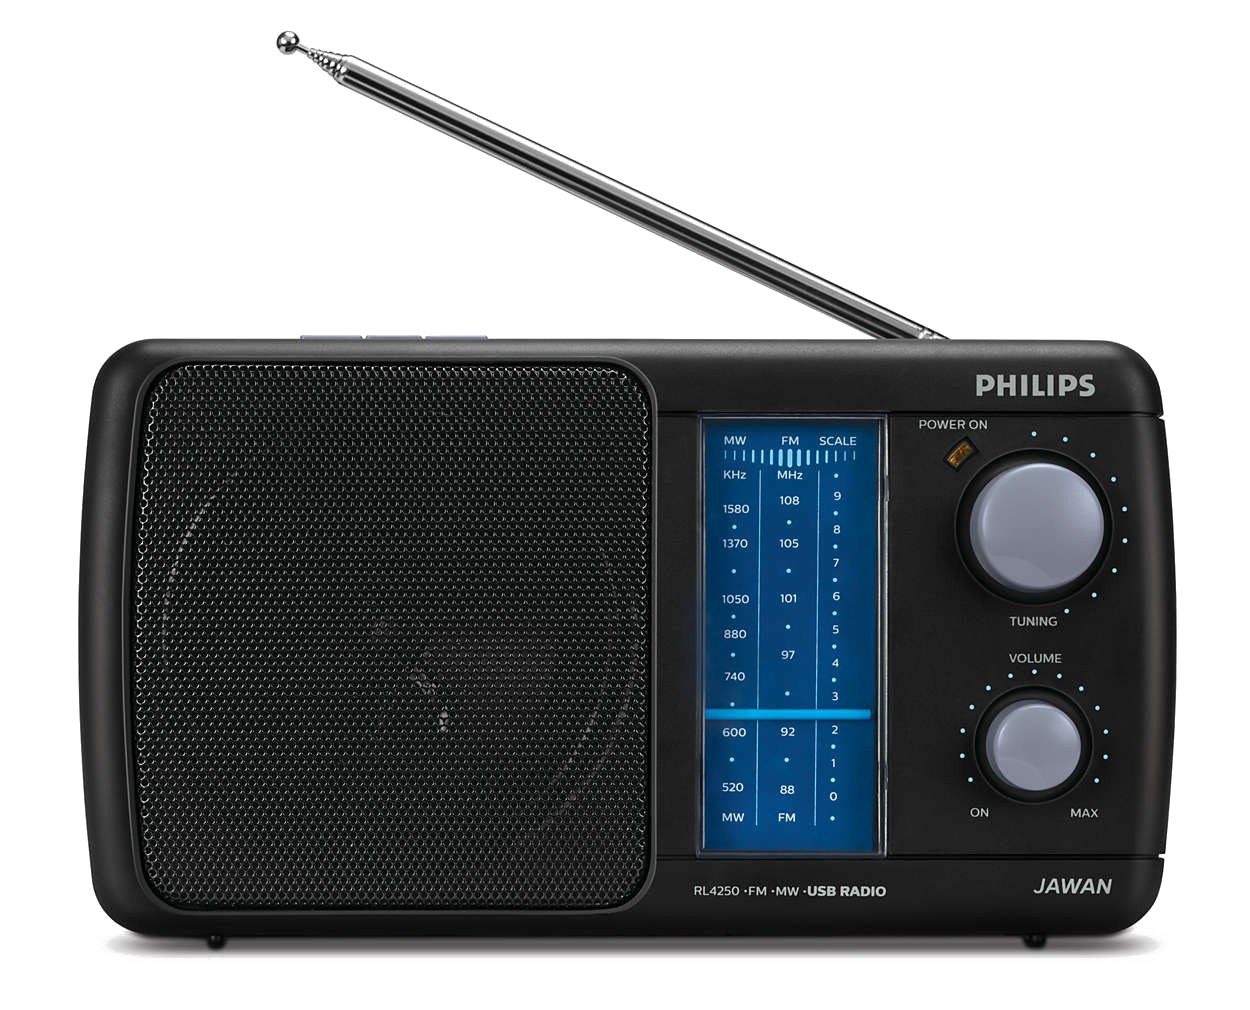 radio-portable-radio-ae1850-00-philips-more-than-15000-online-and